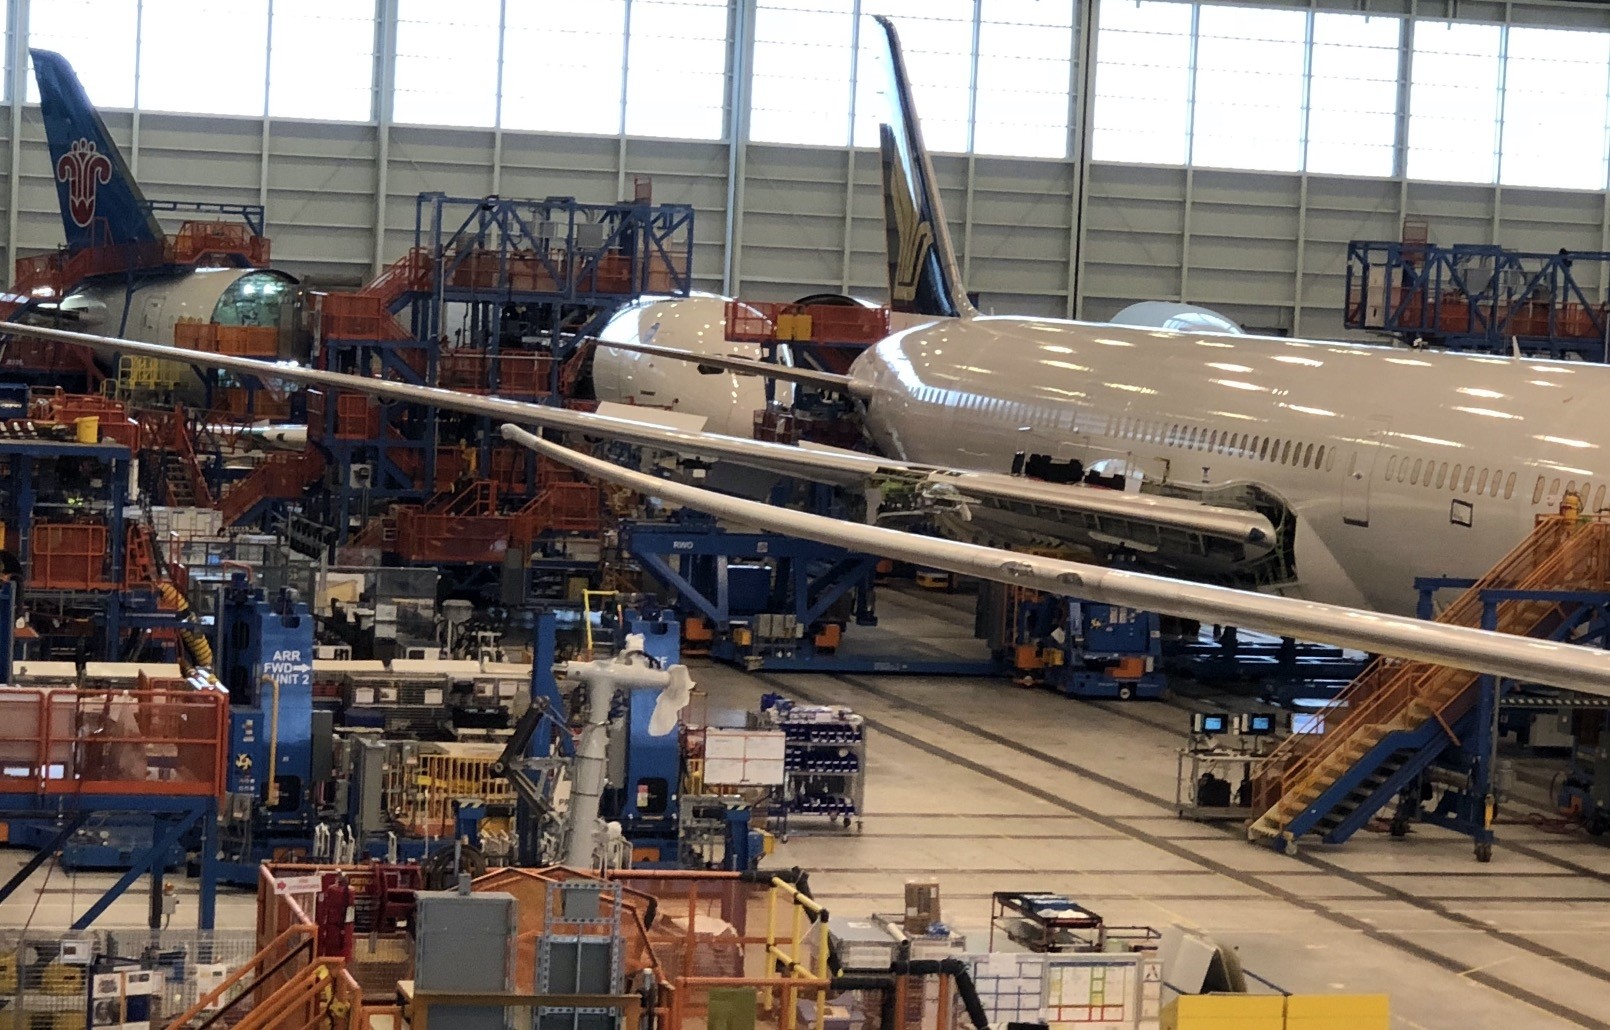 The new Boeing 787s (above) bound for China Southern Airlines and Air China are waiting to be delivered but the prospect of a trade war could make for a less rosy future.